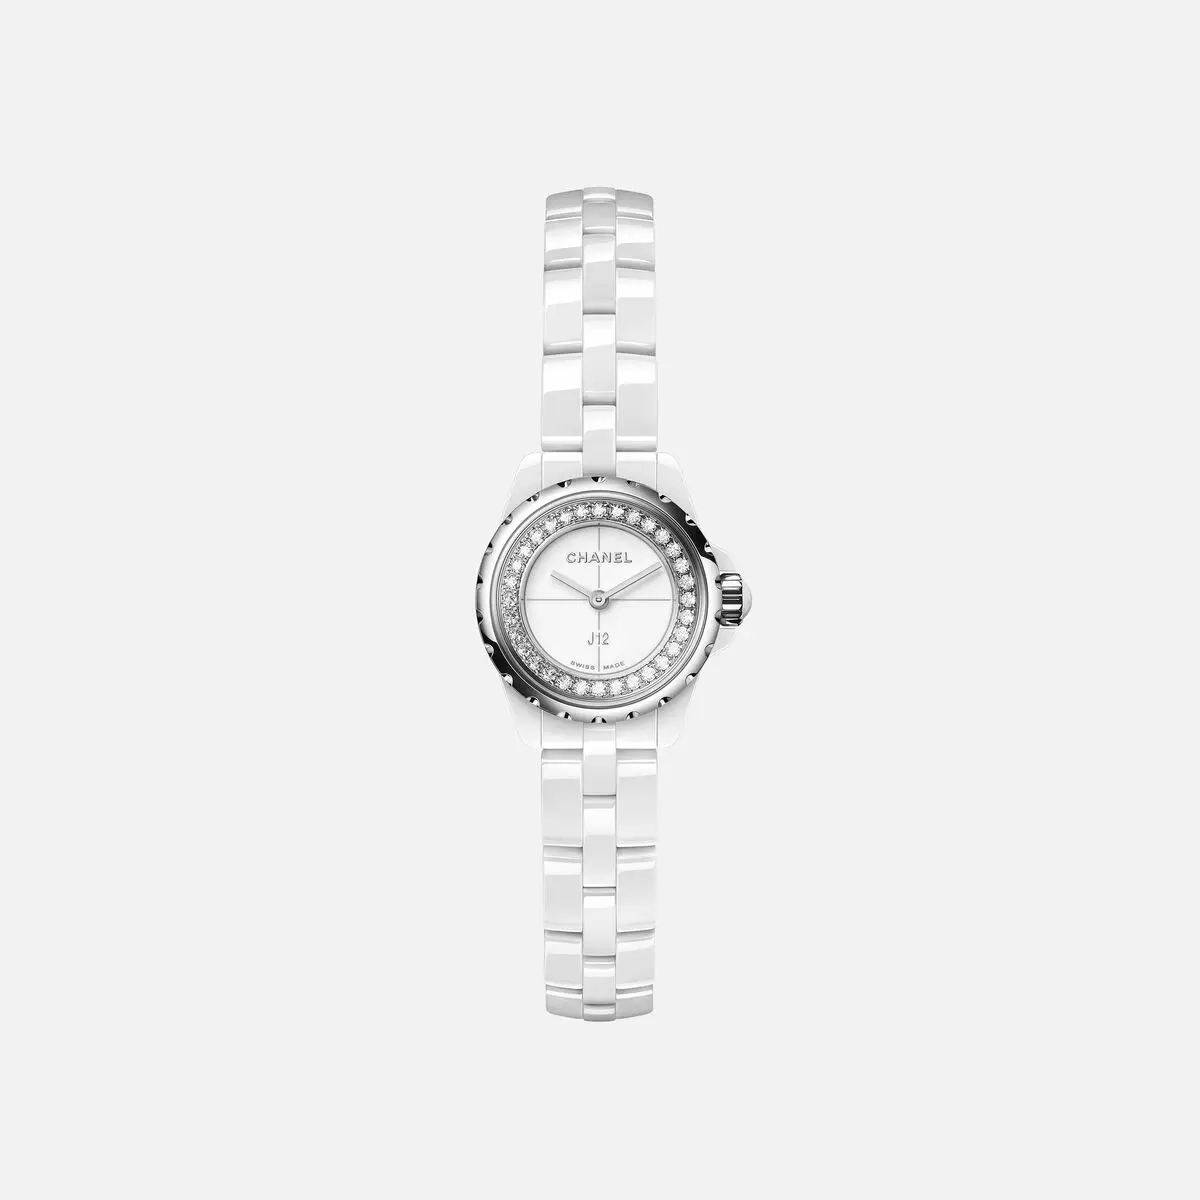 Women's clock with a ceramic bracelet (73 photos): ceramic white and black wrist models, how to shorten them and clean, reviews 3552_58